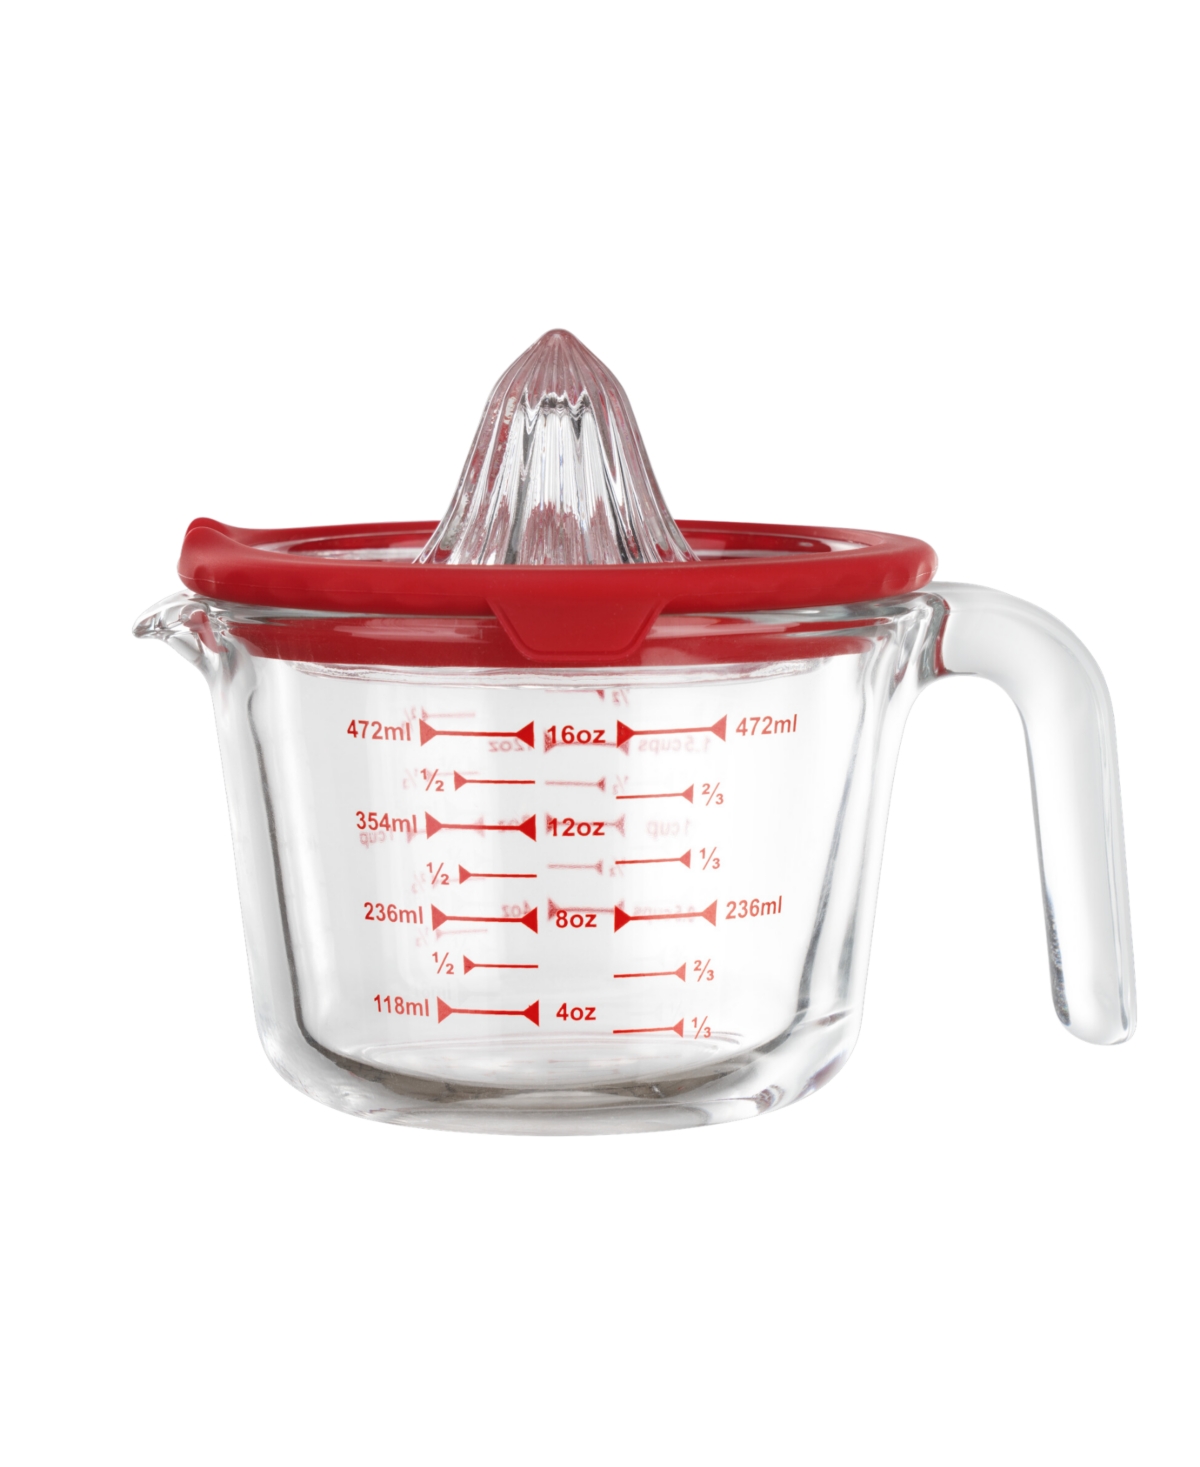 Genicook Glass Measuring Cup With Glass Citrus Juicer Lid In Red